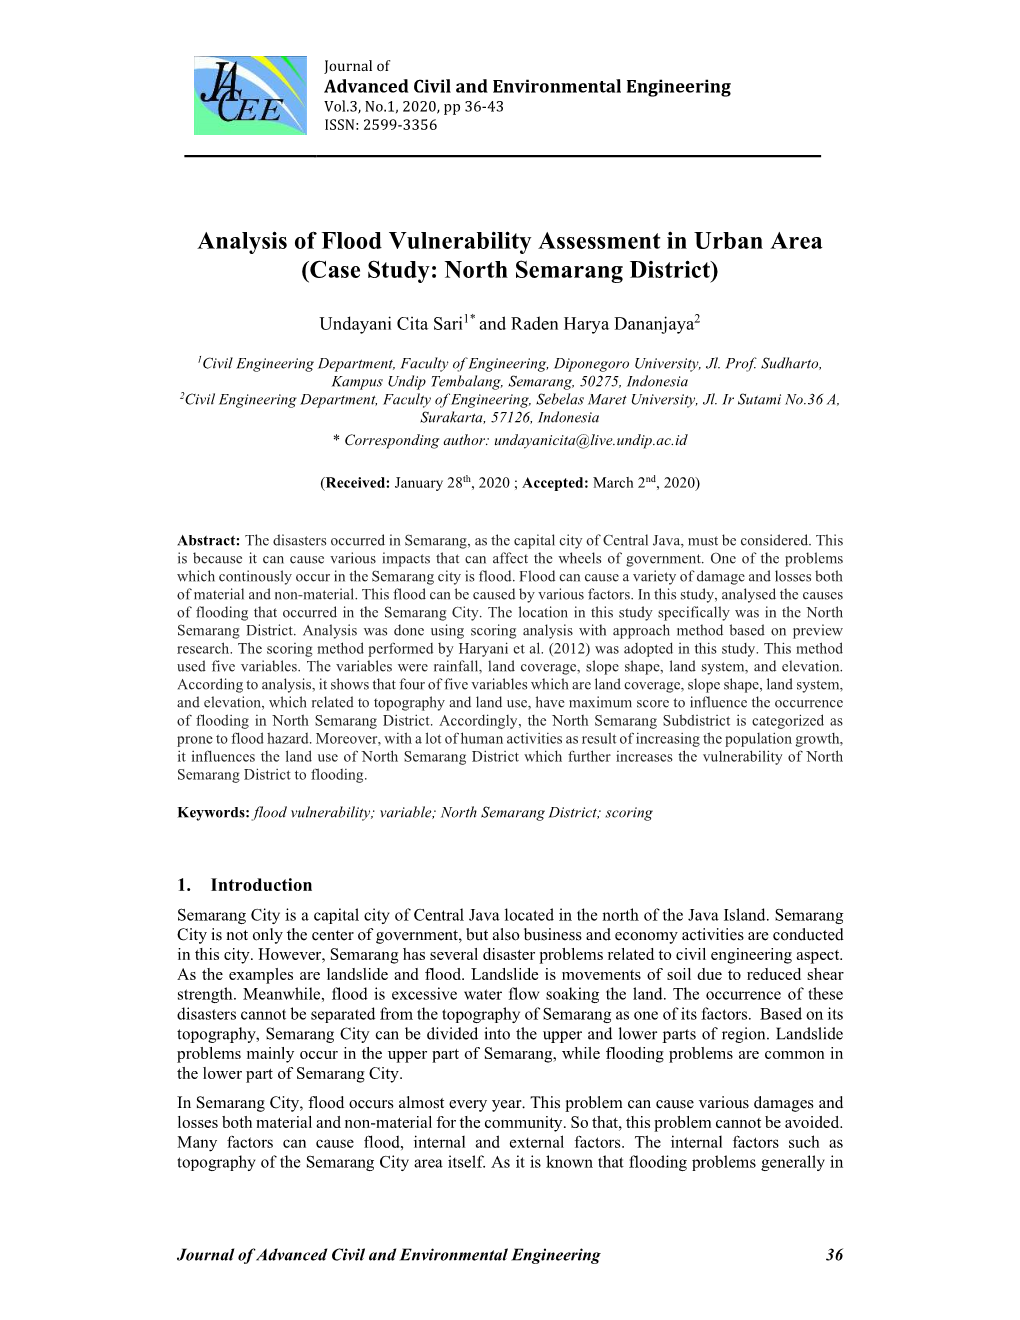 Analysis of Flood Vulnerability Assessment in Urban Area (Case Study: North Semarang District)